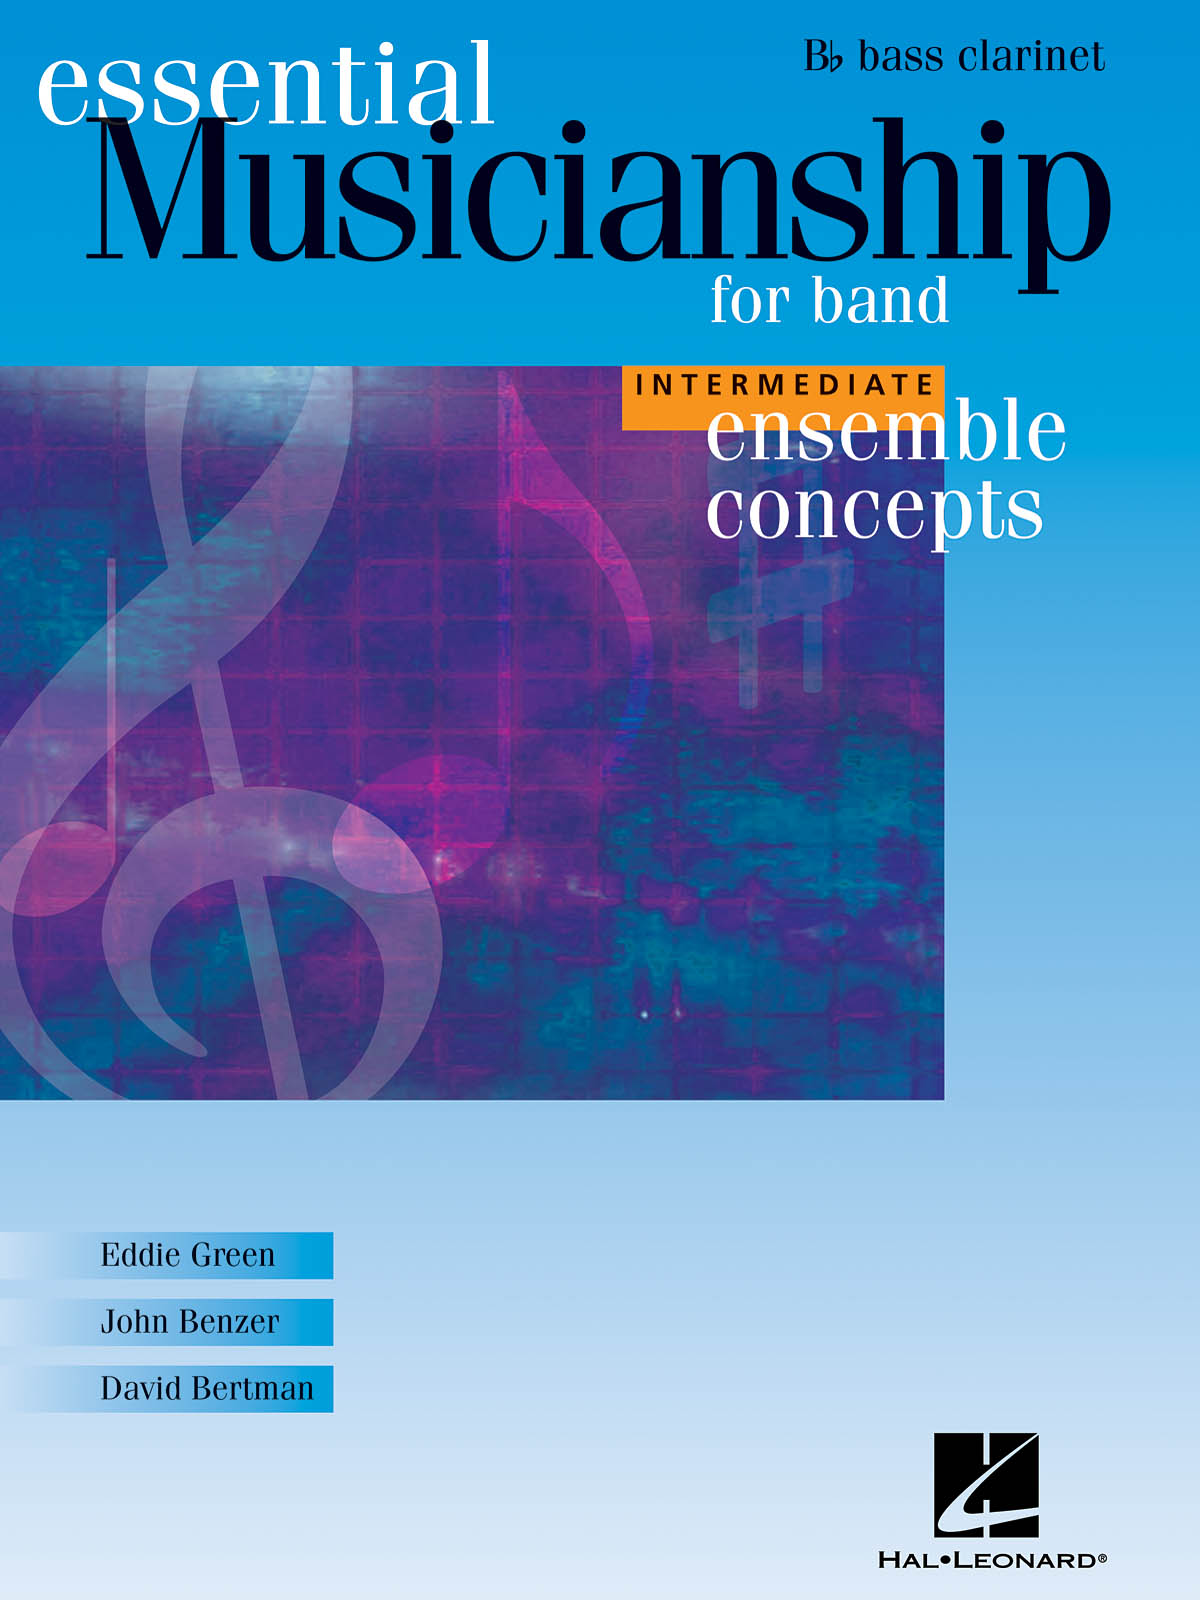 Ensemble Concepts For Band Intermediate Level(Bass Clarinet)